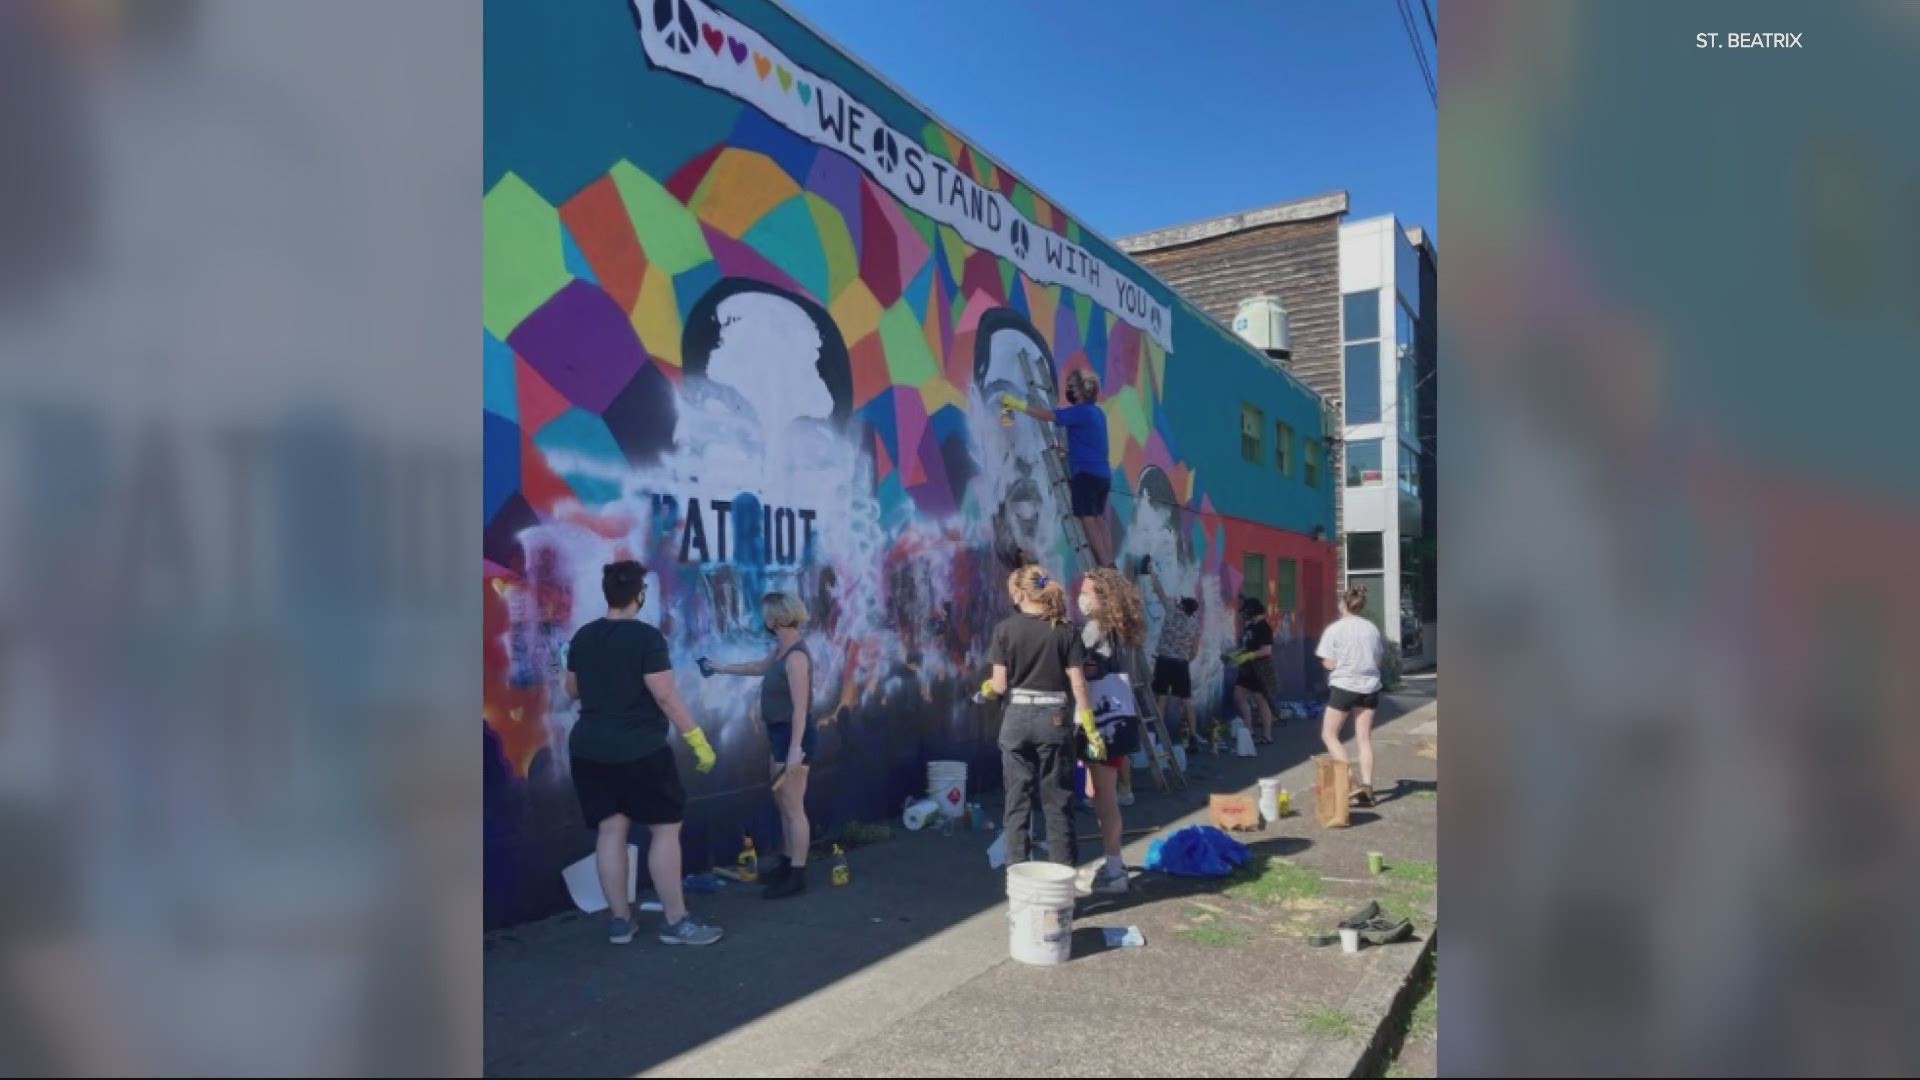 The community came together to help restore the mural.